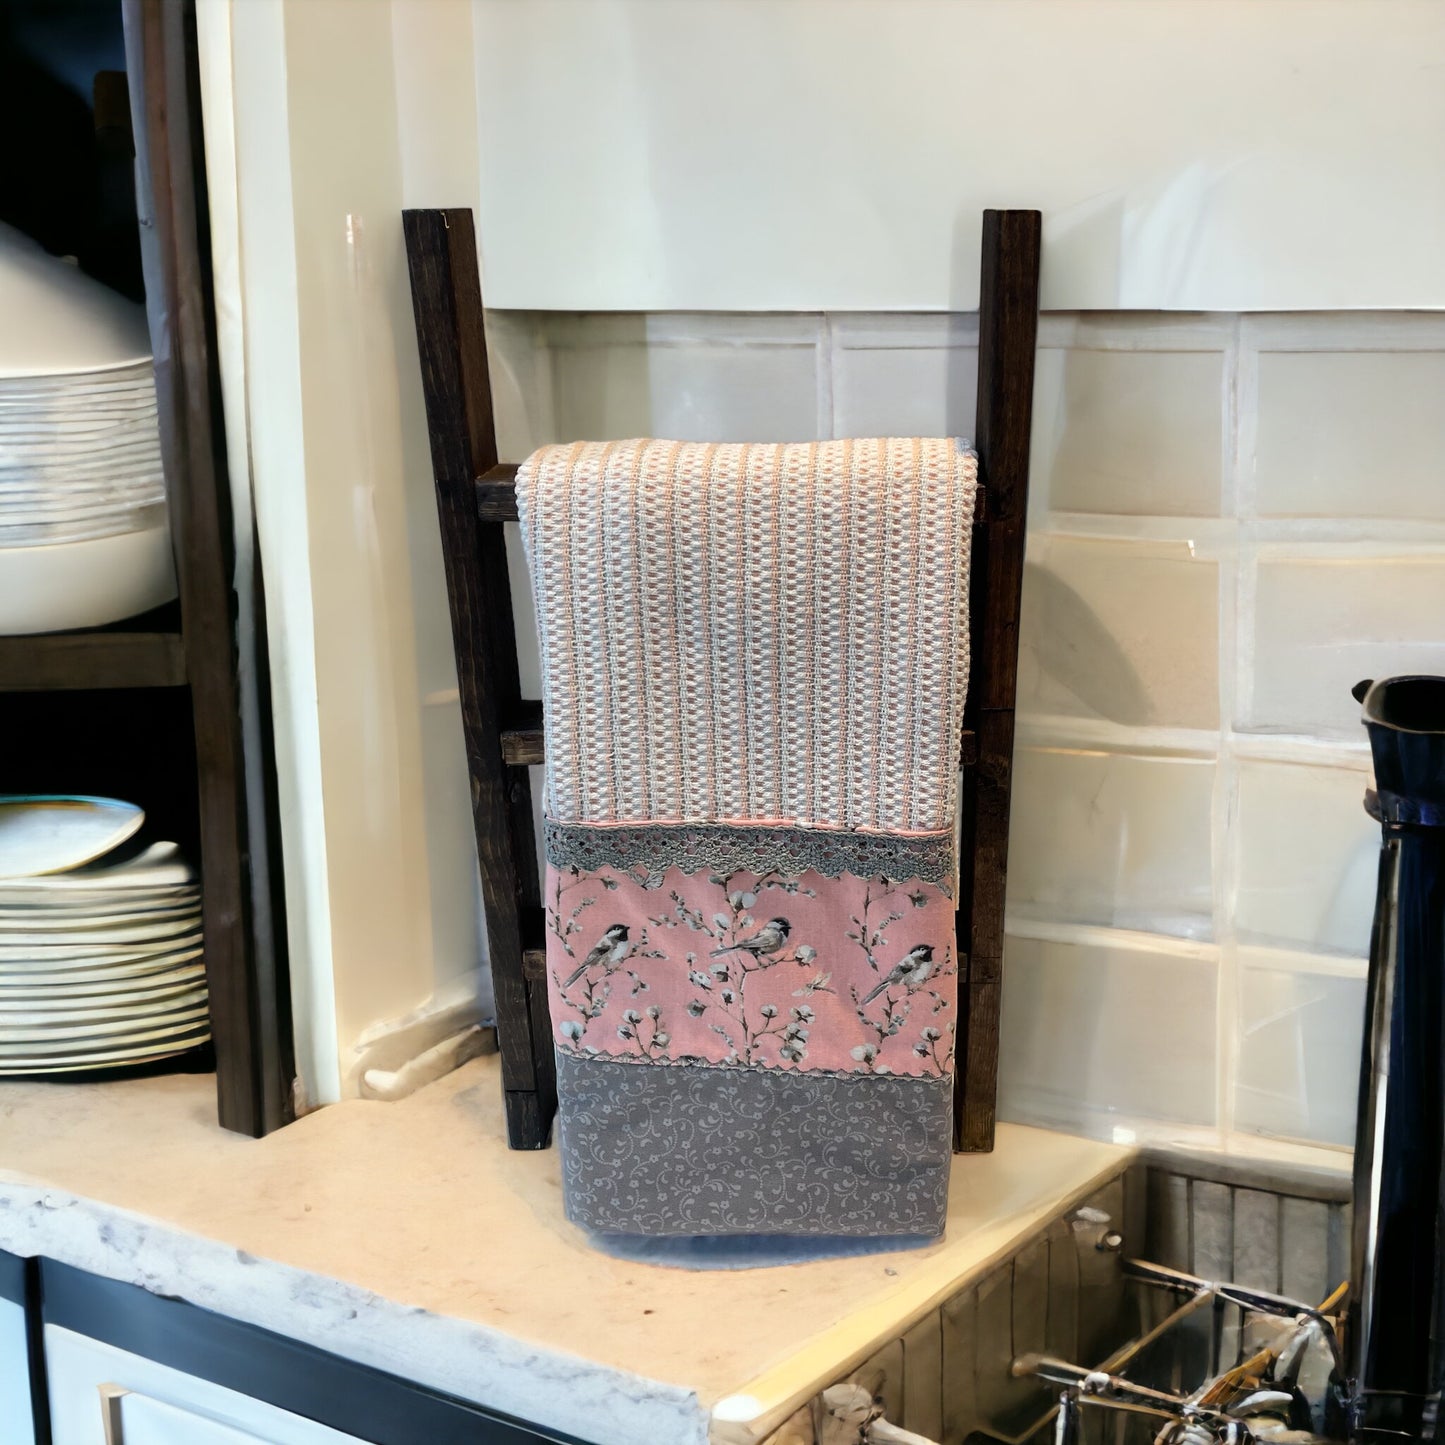 Pink & Grey Striped Quilted Kitchen Dish Towel with Embroidery Stitching & Lace - One of a Kind Farmhouse Decor